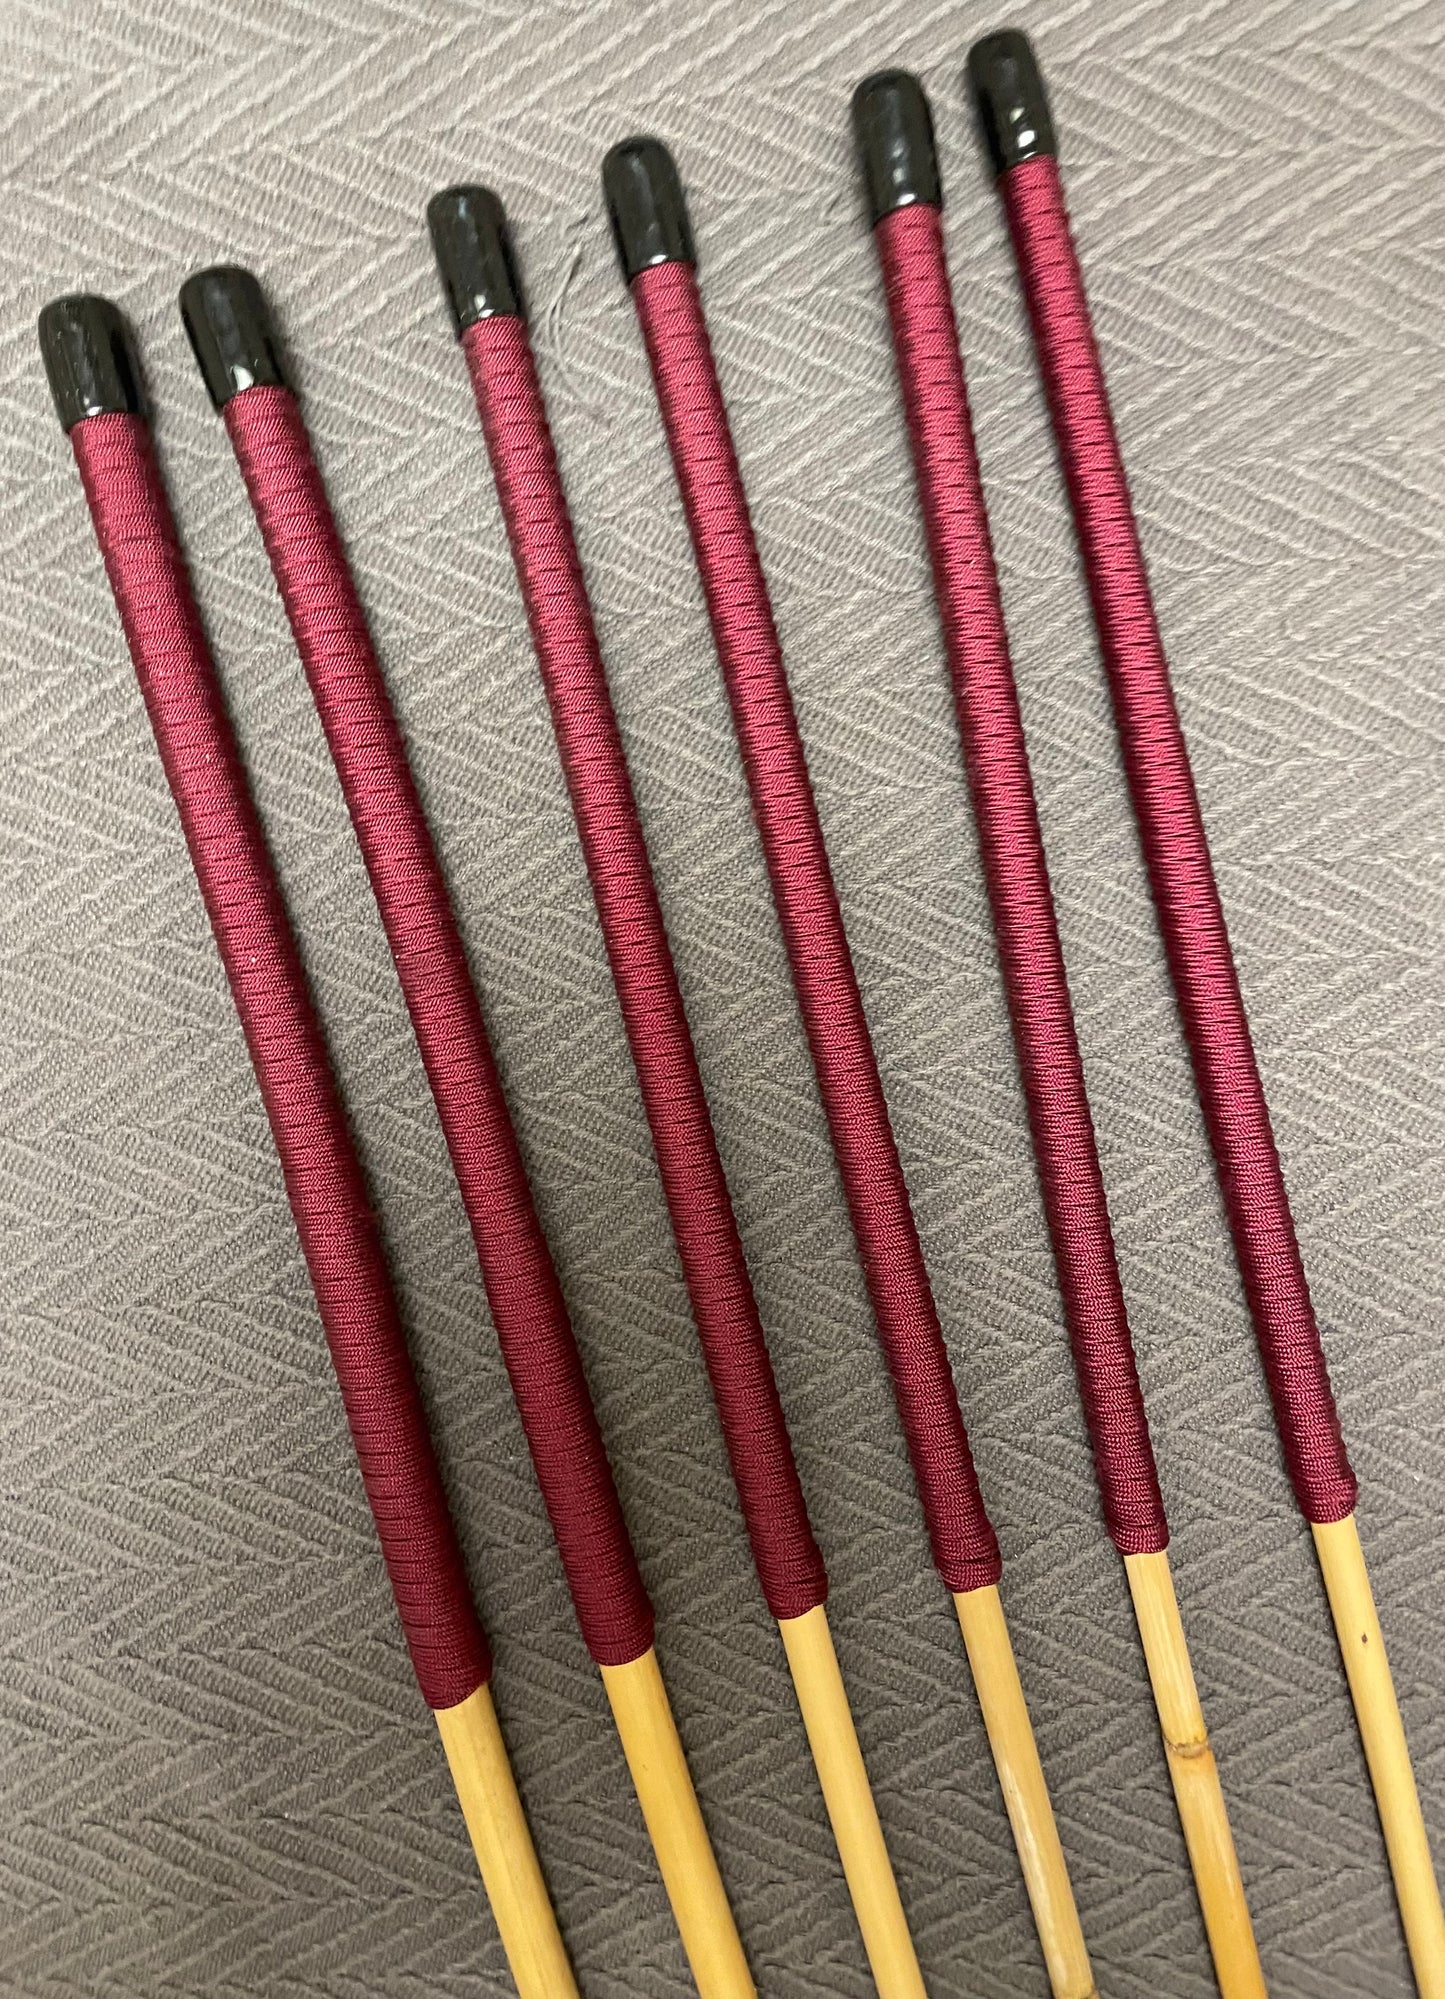 Set of 6 Classic Dragon Rattan Punishment Canes / School Canes  with Red Paracord Handles